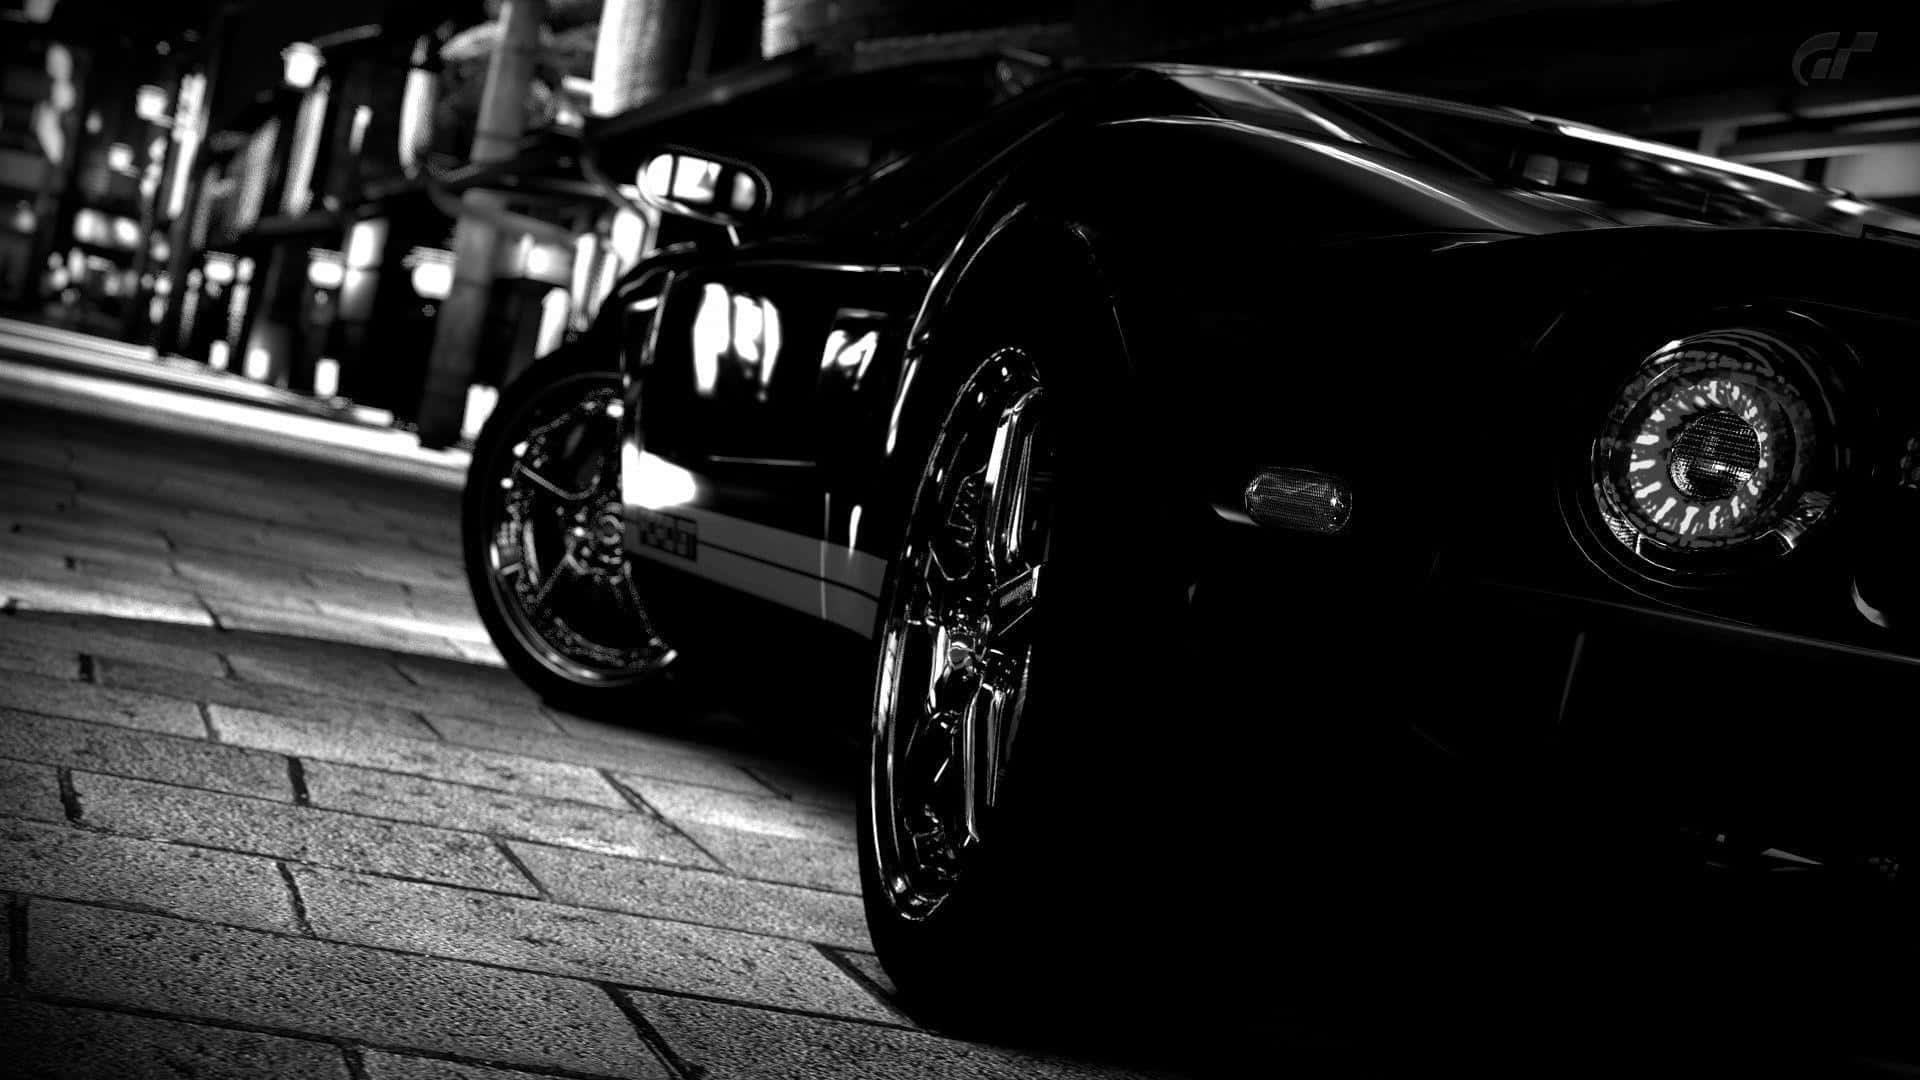 Timeless Elegance of a Black and White Car Wallpaper